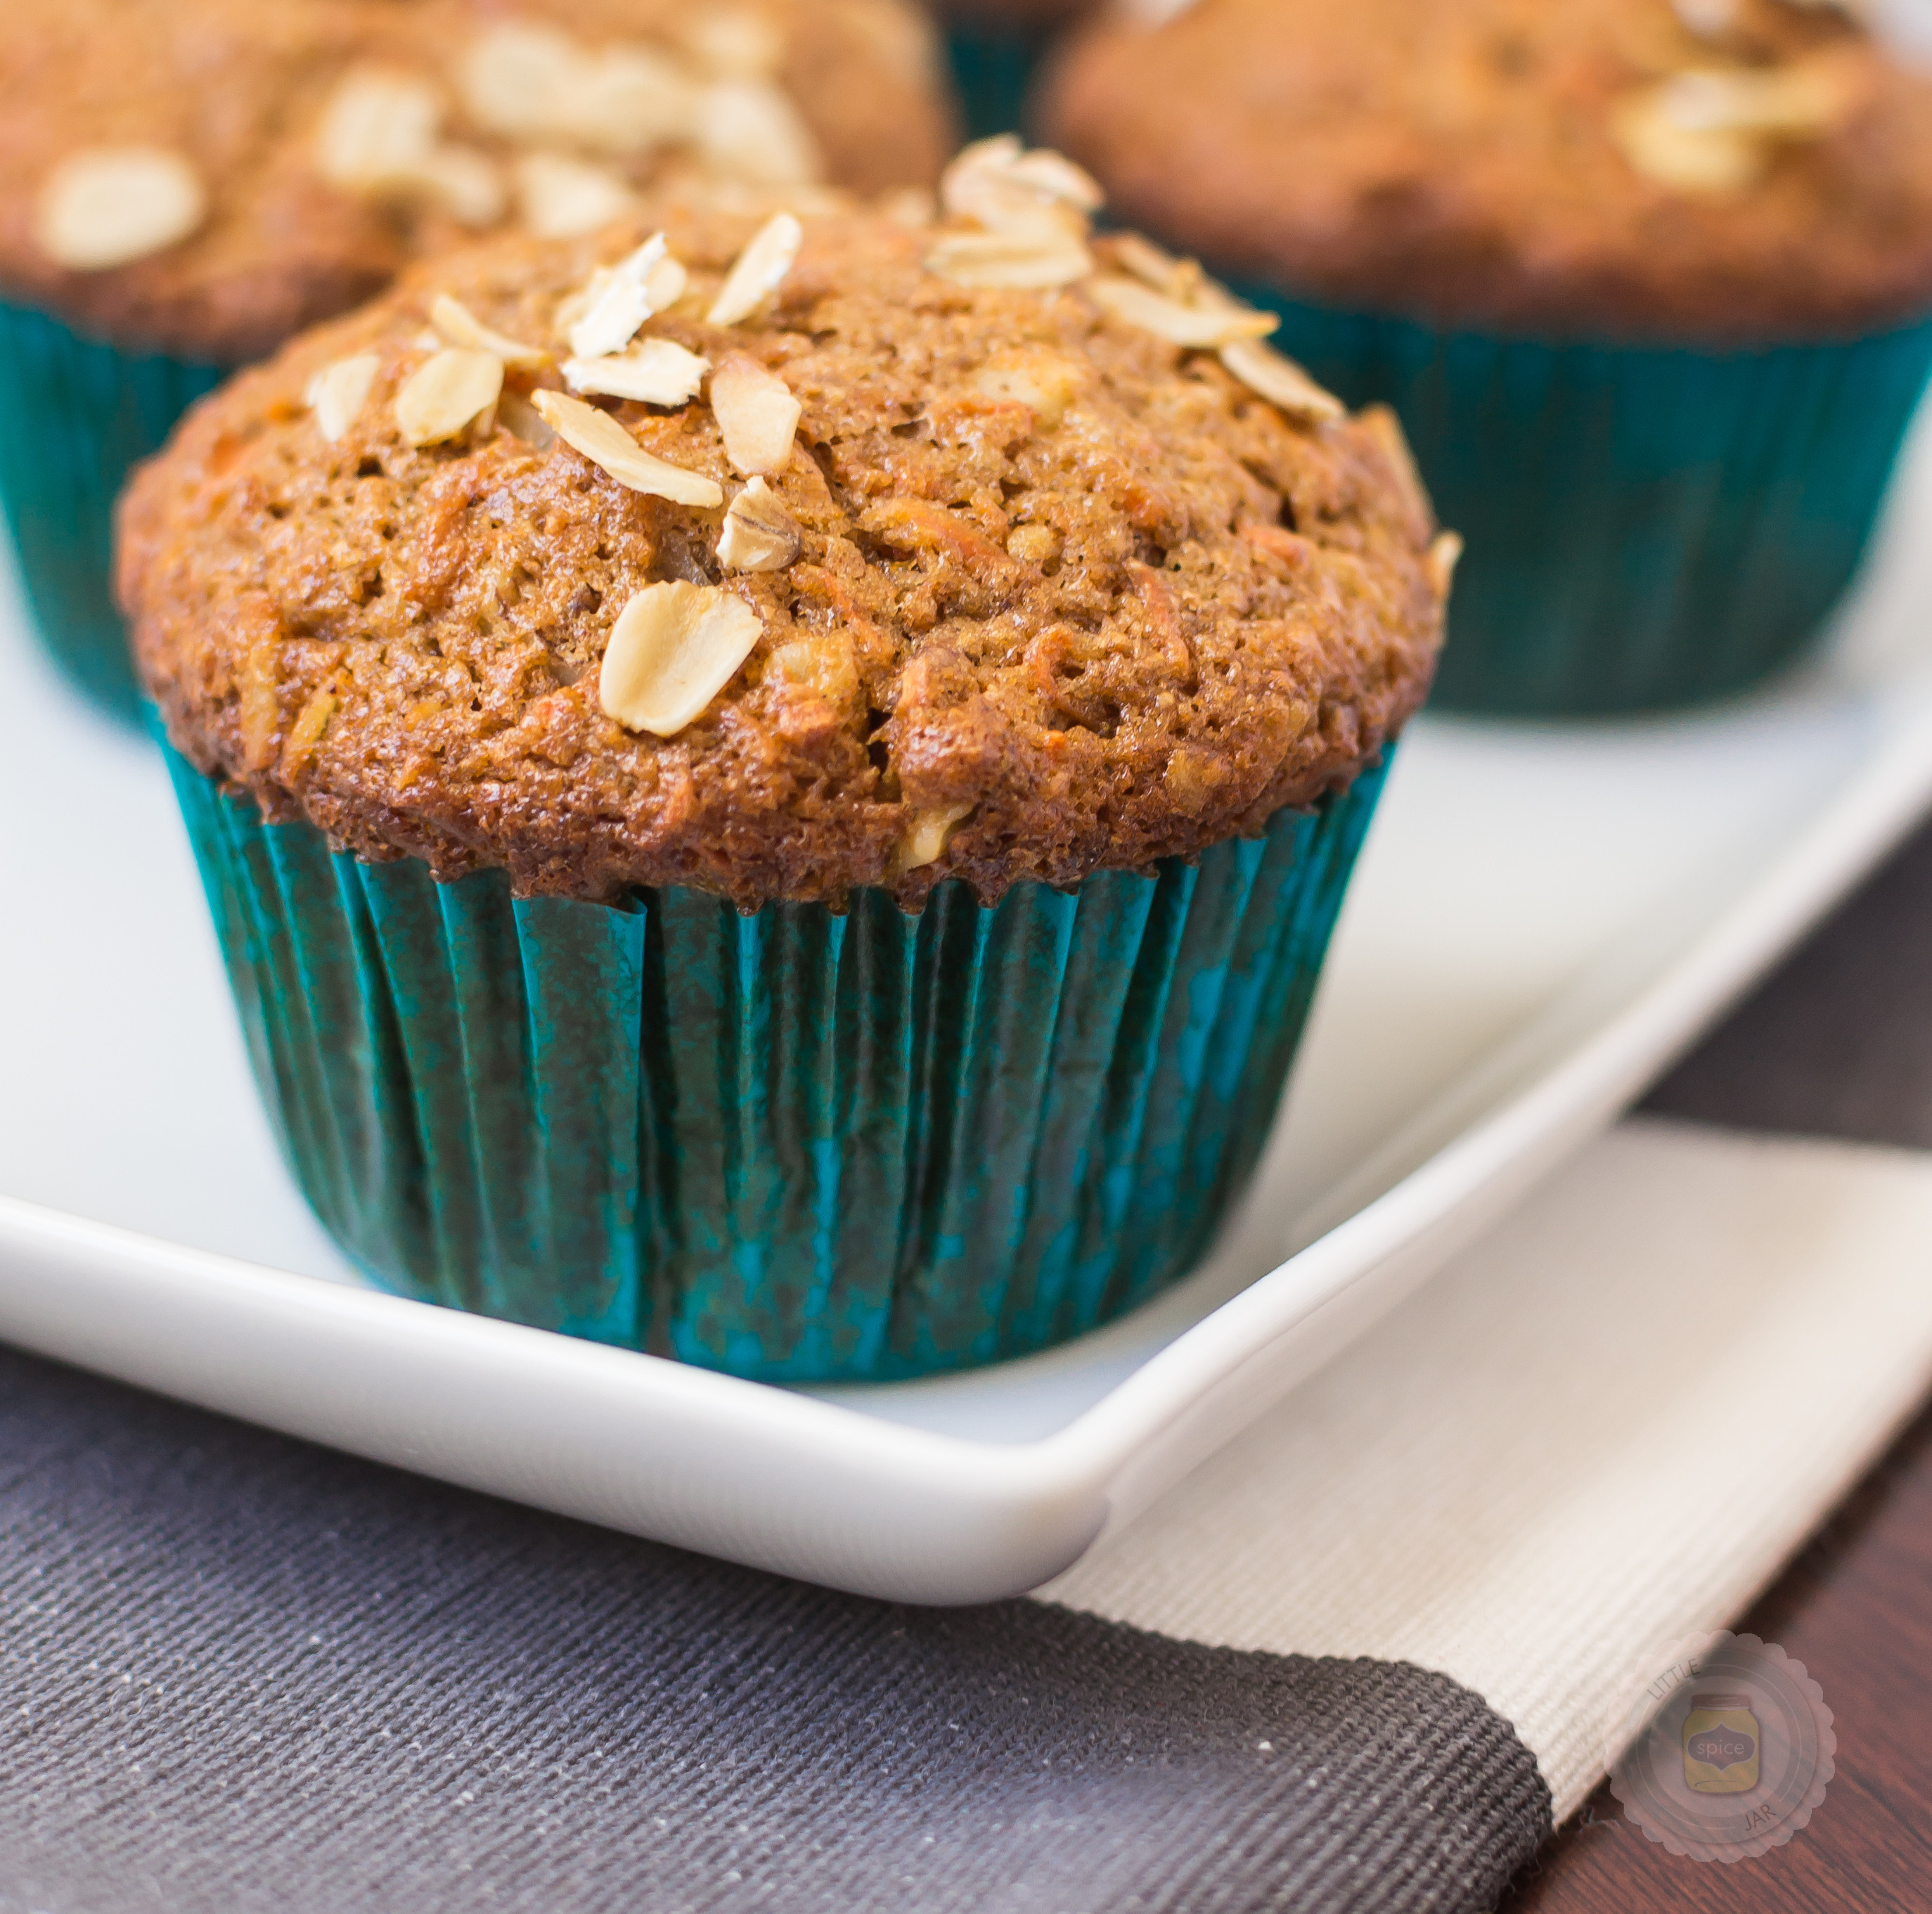 Carrot Cake Muffins Healthy
 SUPER MOIST AND HEALTHY CARROT CAKE MUFFINS